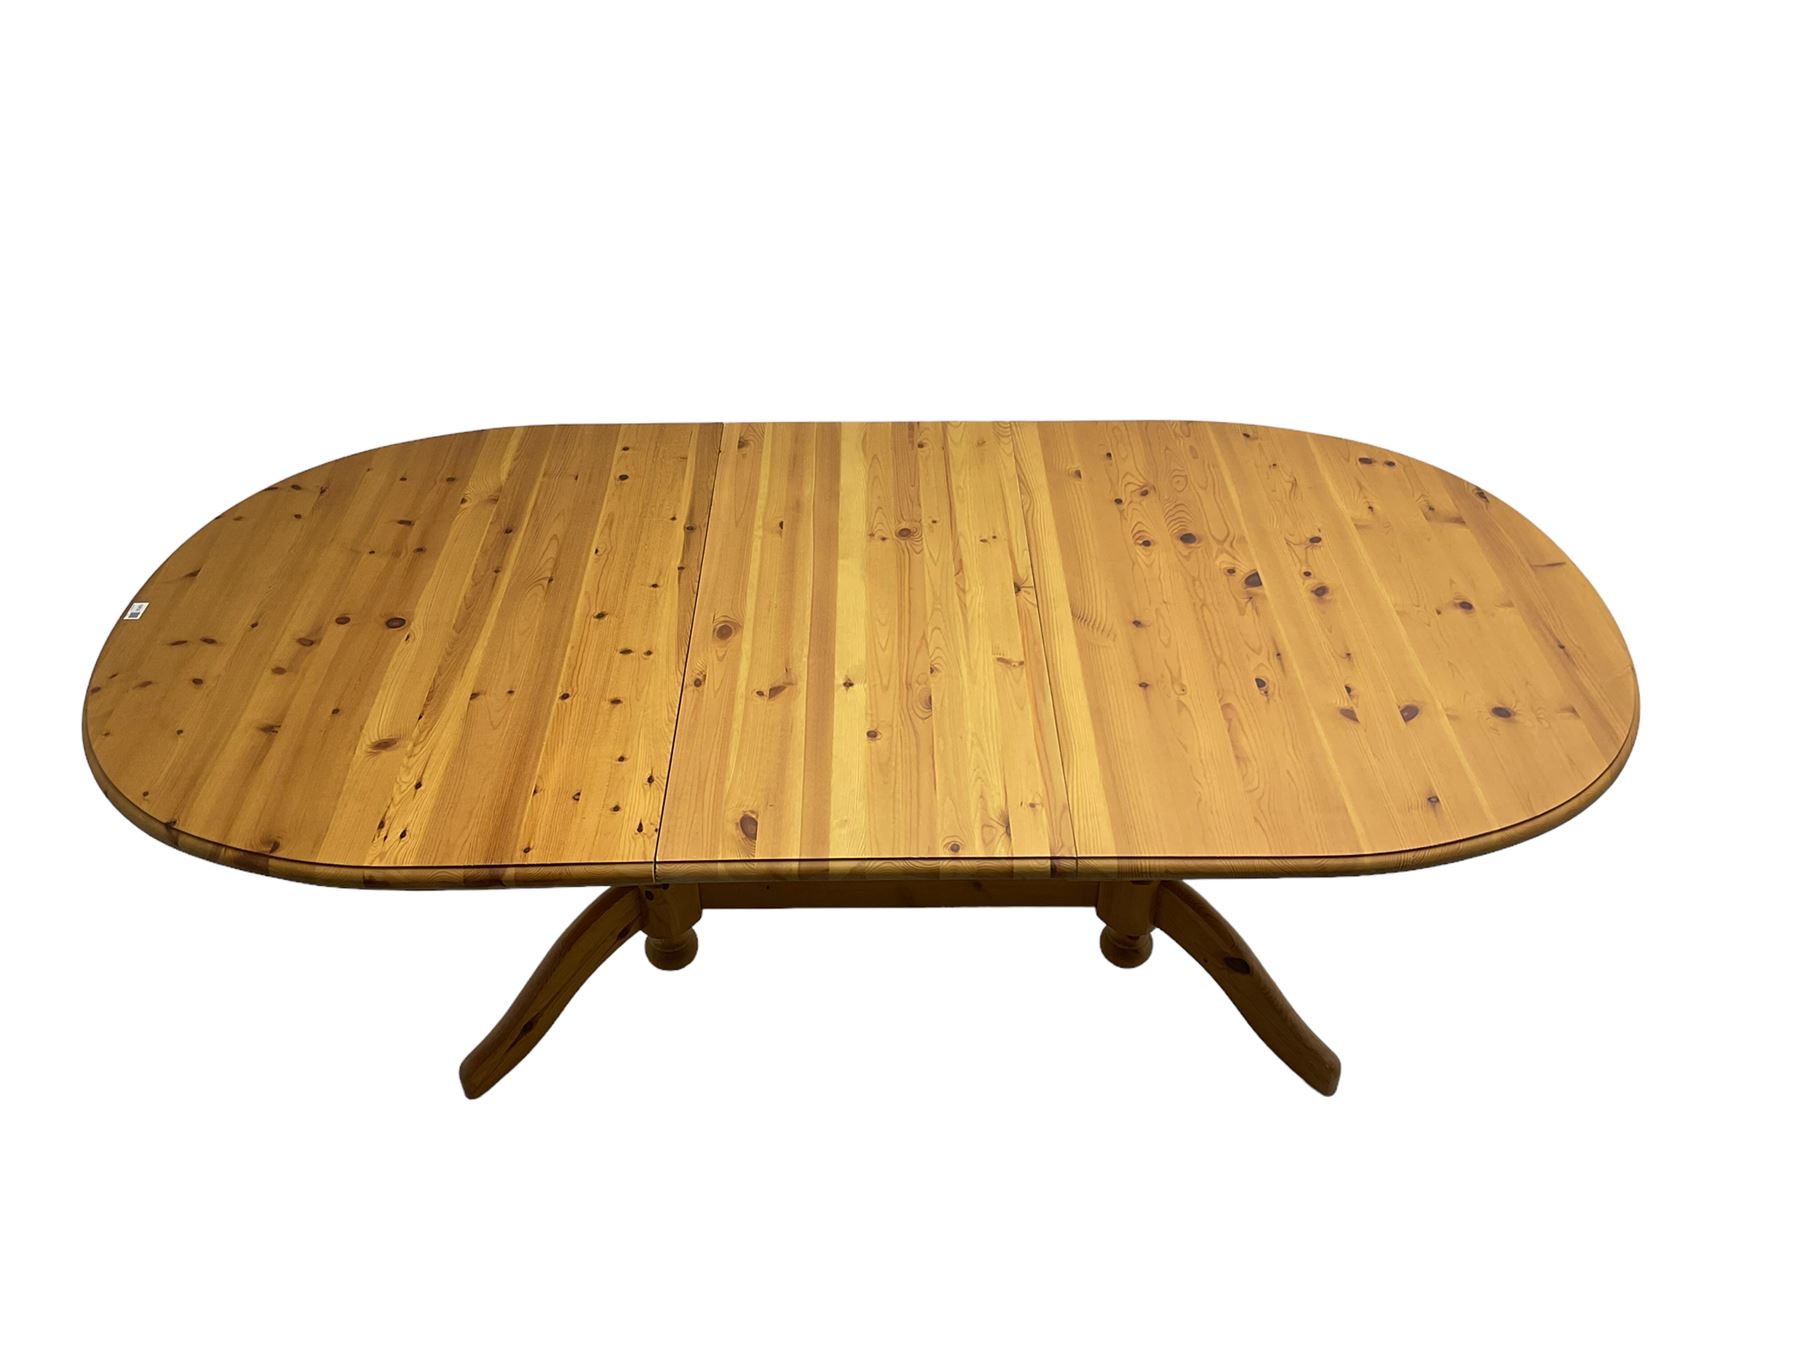 Pine extending dining table with additional leaf - Image 5 of 7